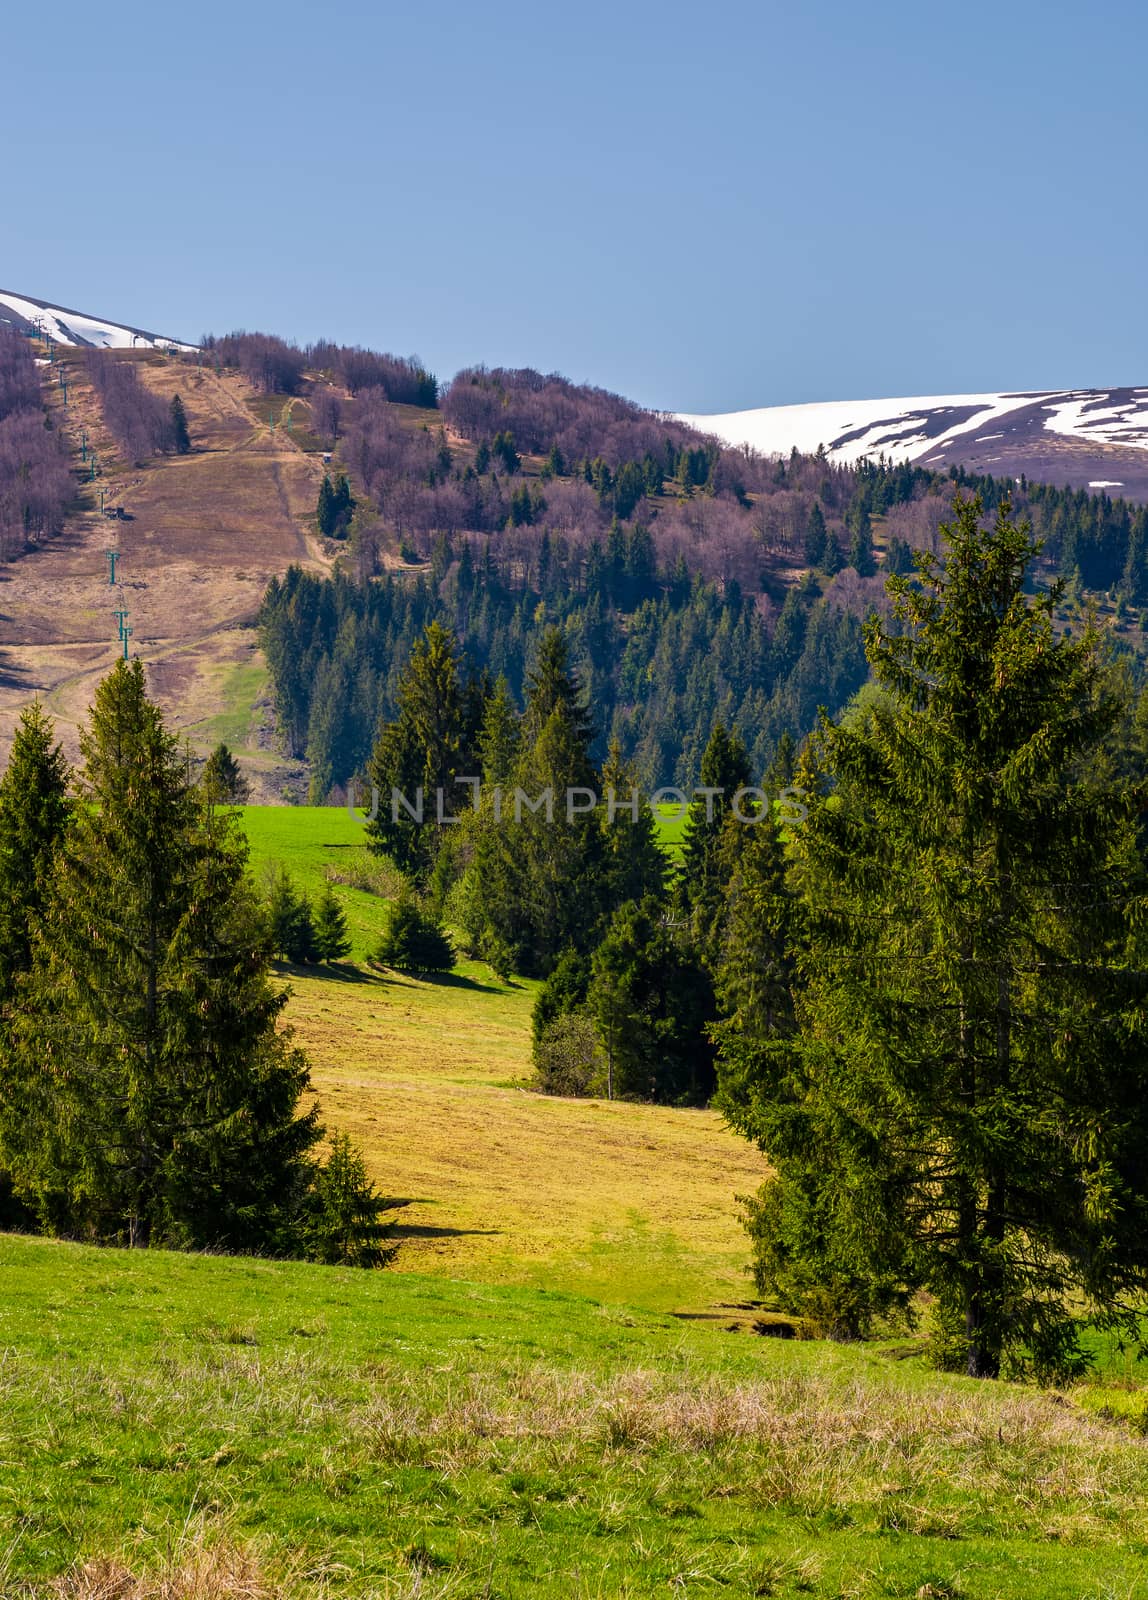 spruce forest on the grassy hills in the valley by Pellinni